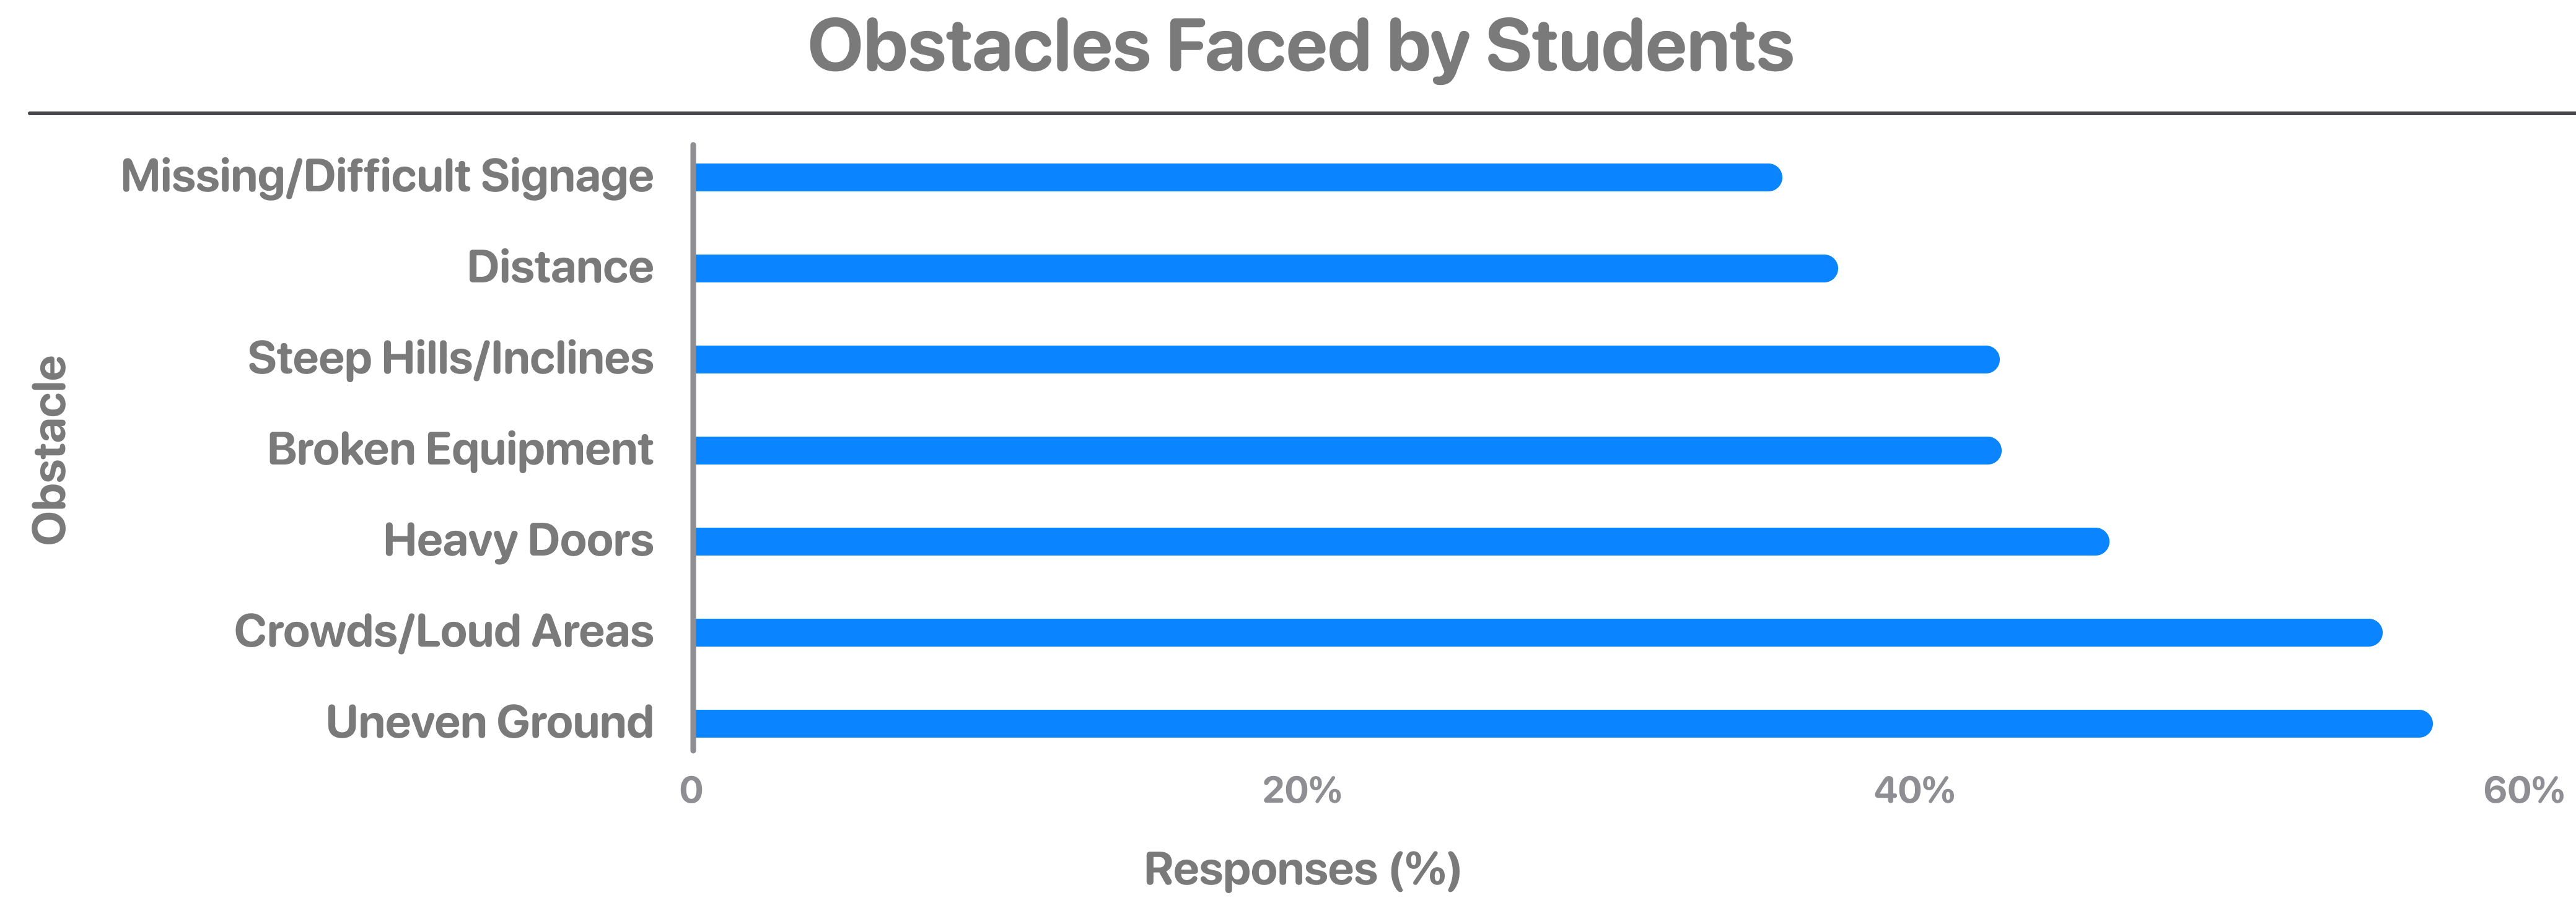 Bar graph of obstacles faced by students on UNC's campus